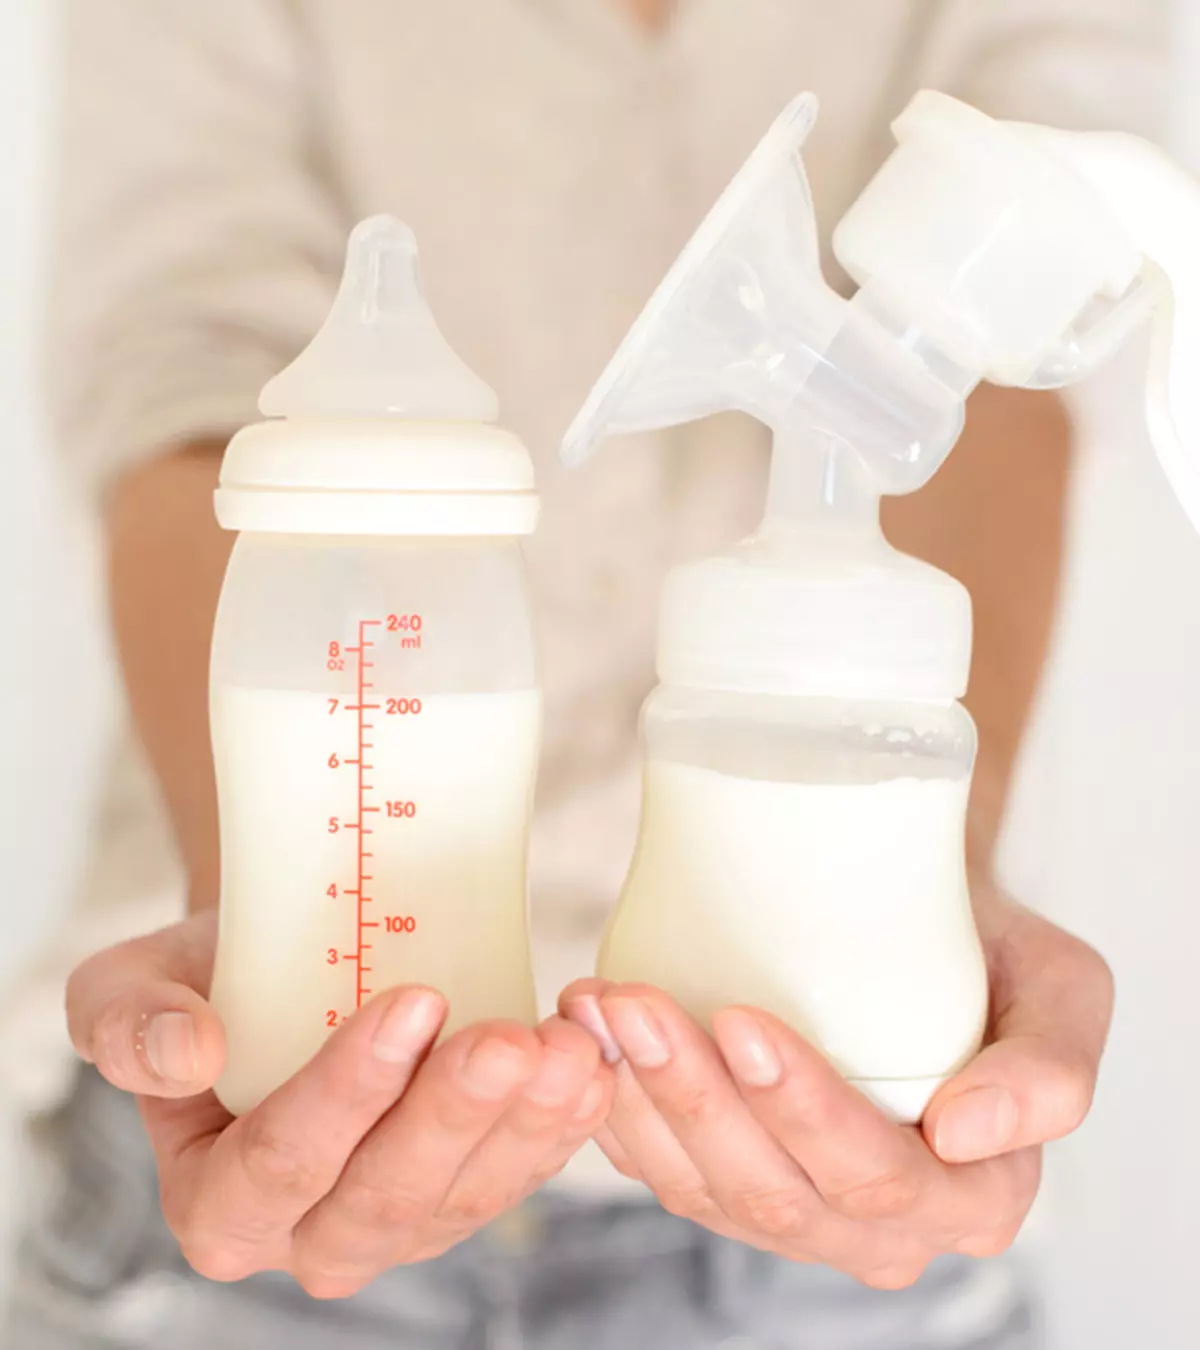 How To Tell If Breast Milk Is Bad? Signs And Tips To Prevent